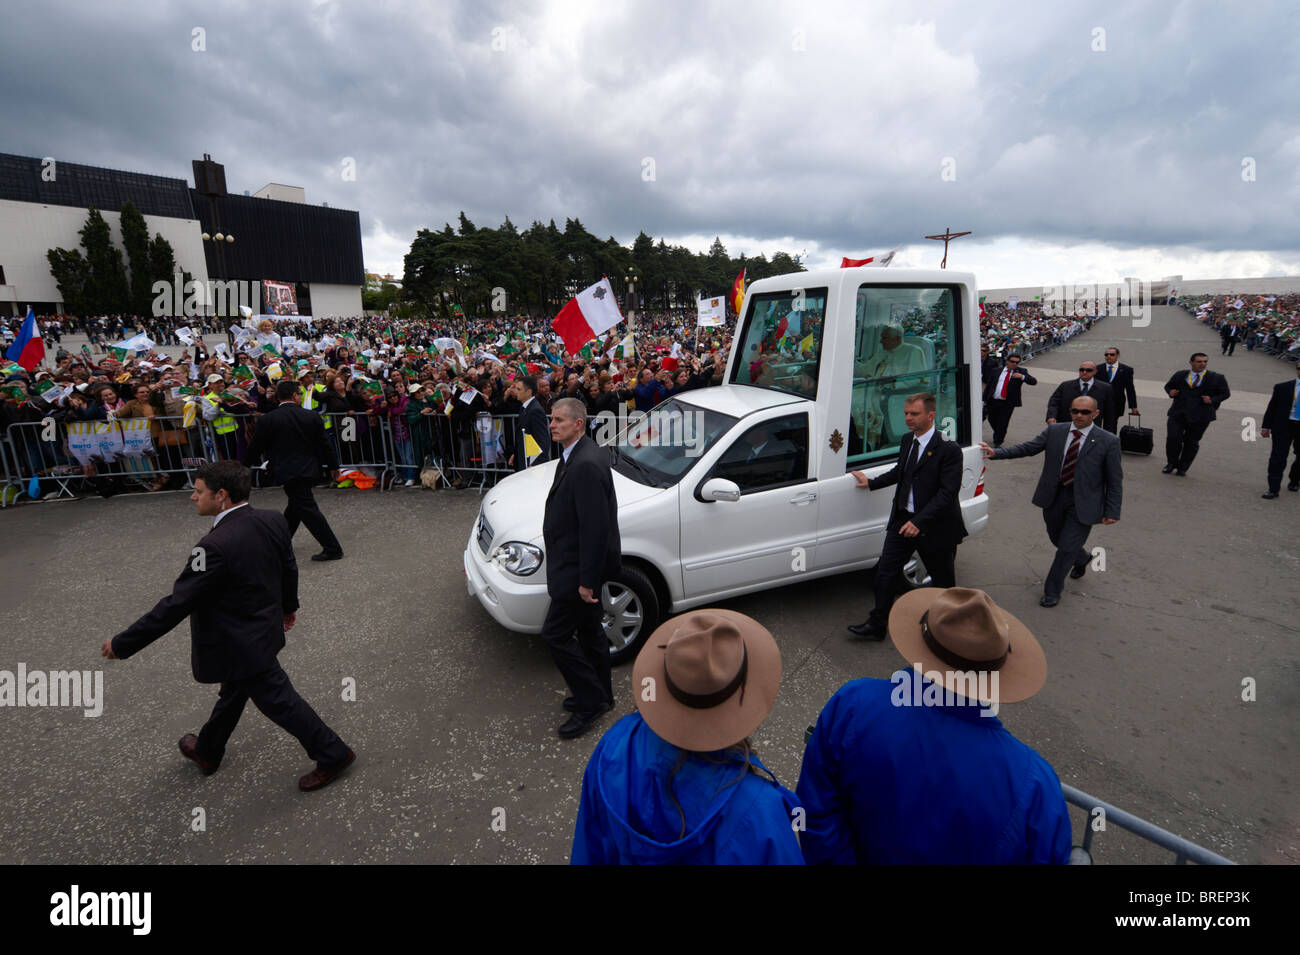 Pope Benedict XVI waves at pilgrims from inside his armored car at the Our Lady of Fatima shrine during his visit to Portugal Stock Photo